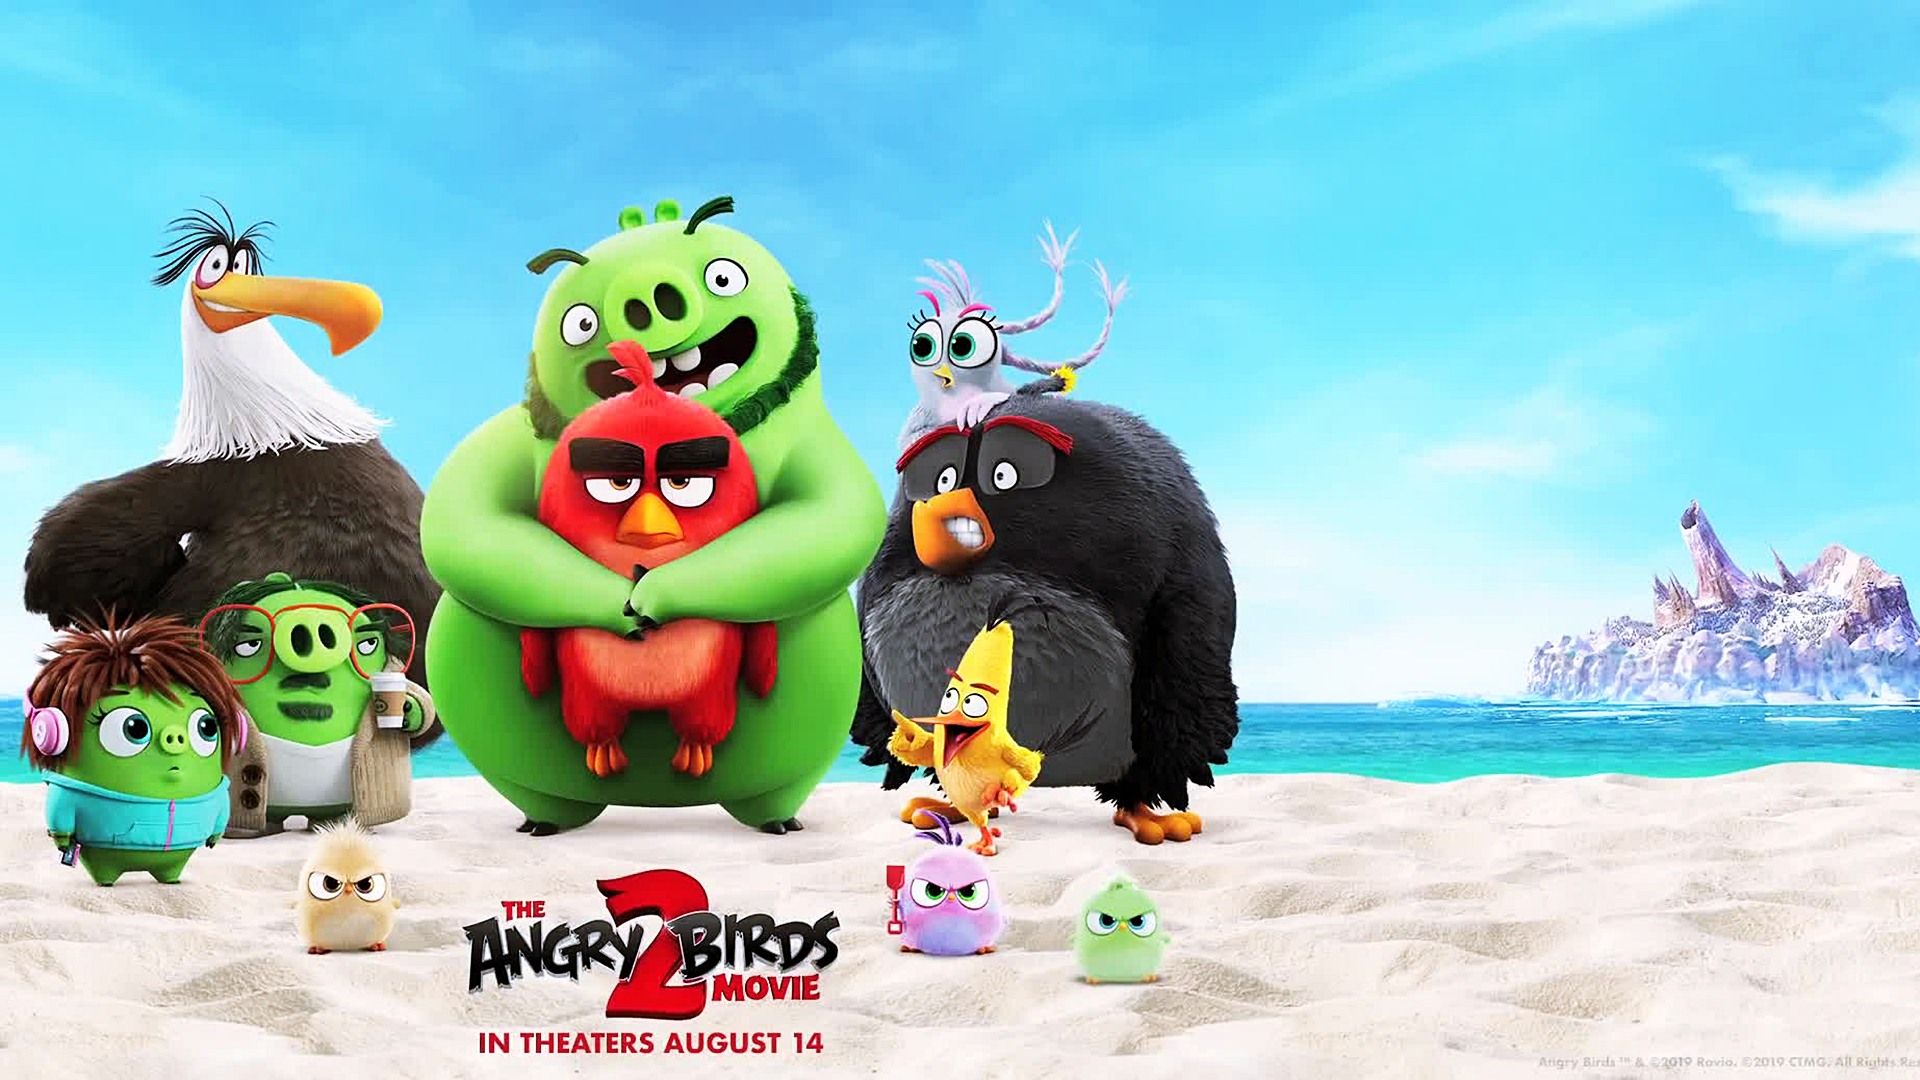 The angry birds movie wallpapers